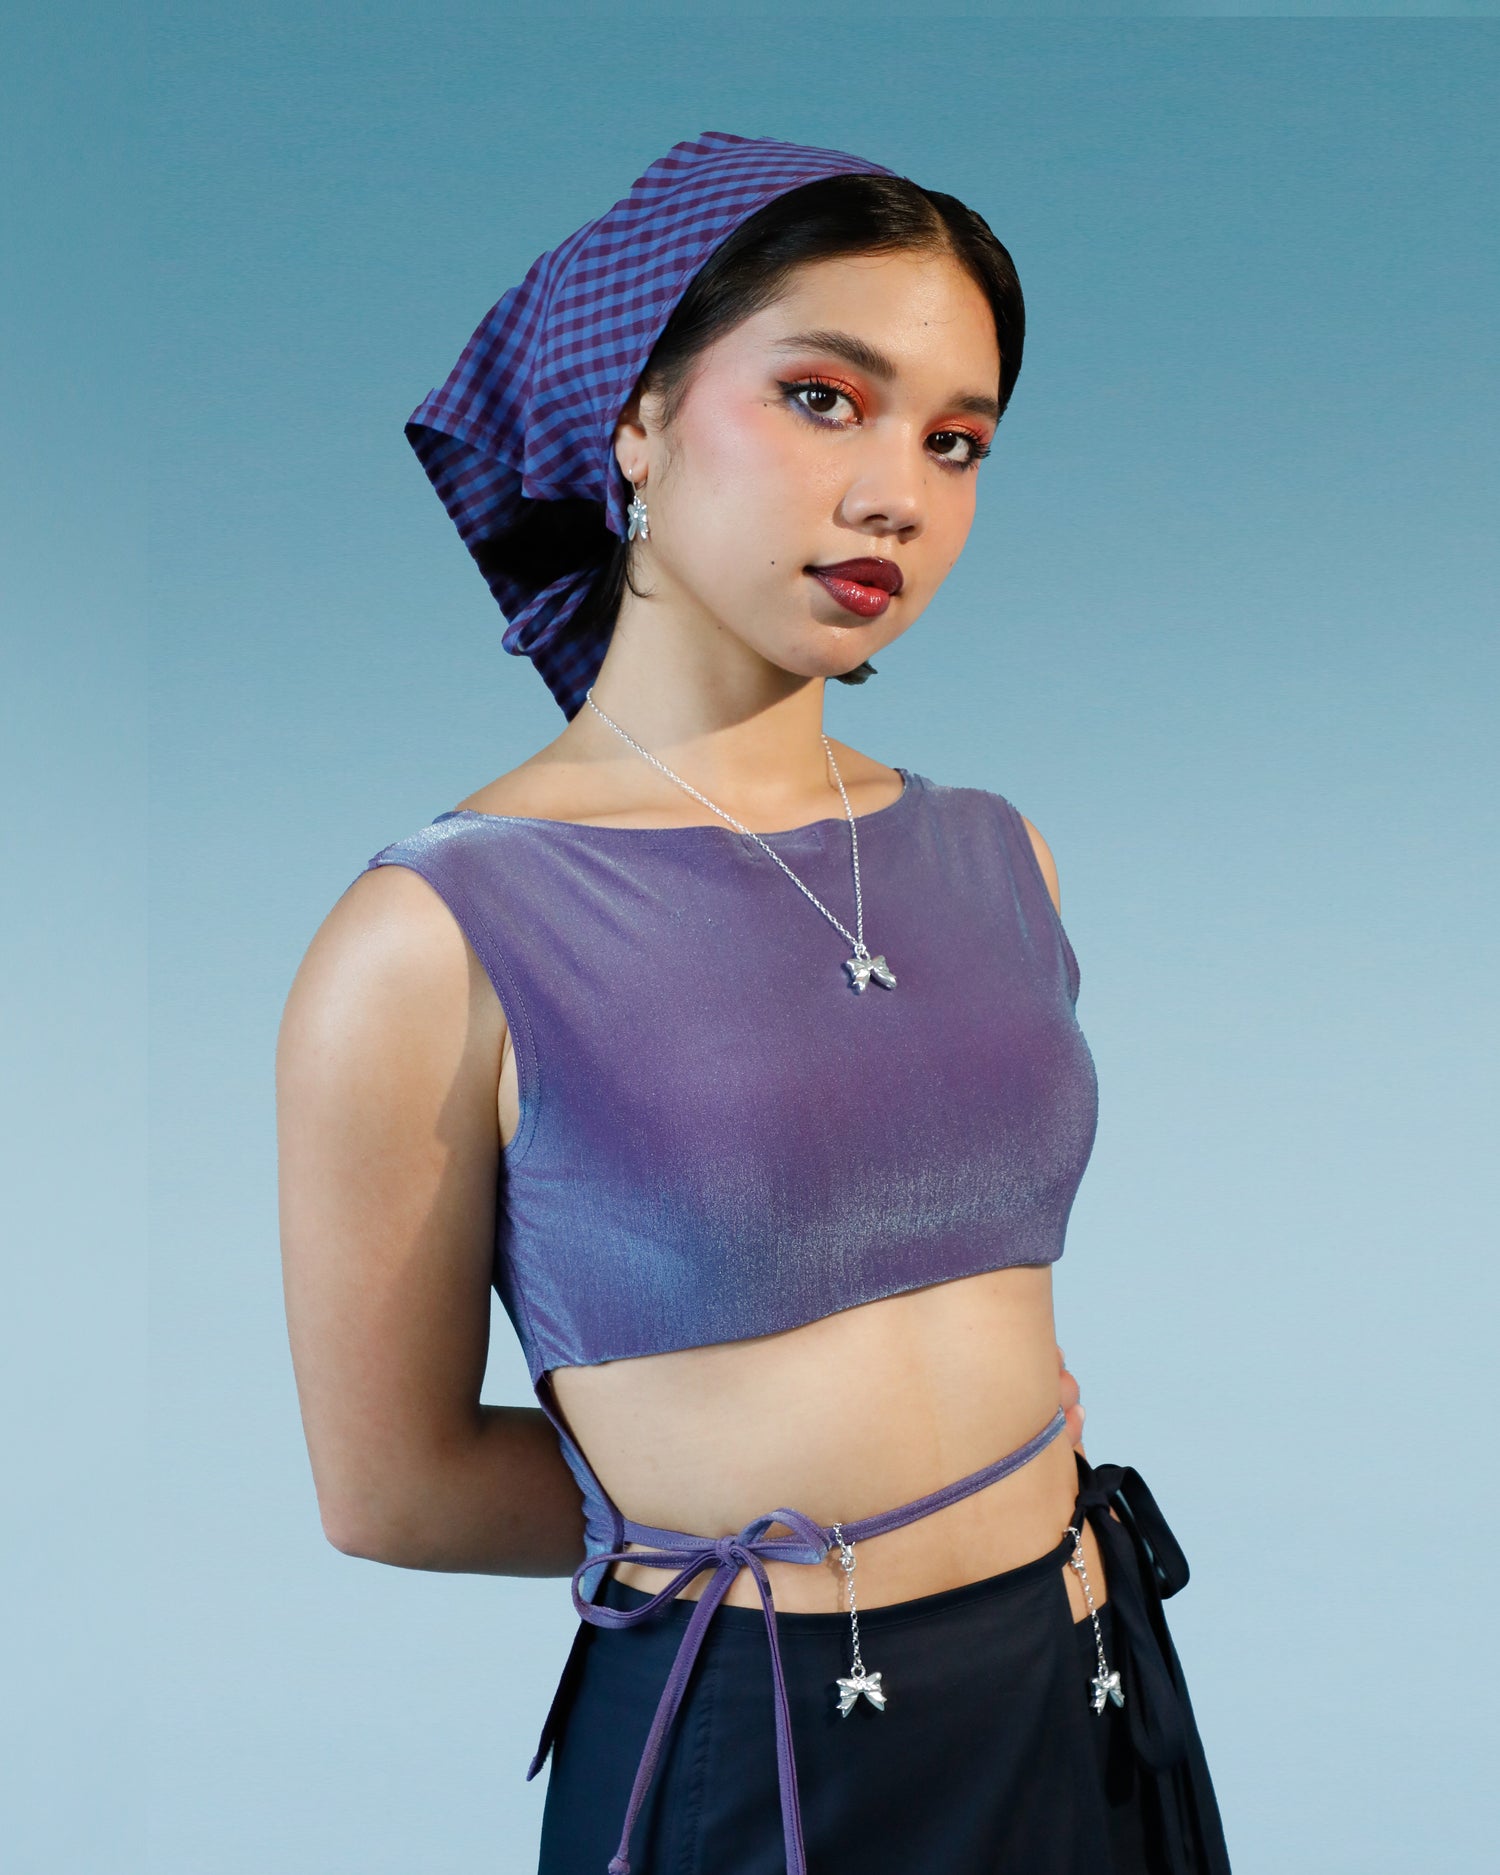 Caitlin Snell | Bow | Maxi Skirt | Sustainable Fashion | Ethical Design | NZ Made | New Zealand Made | Bow Bag | Made in New Zealand | Tie Top Sample | Head Scarf | Bow Necklace 925 Silver | Caitlin Snell Label Small Business